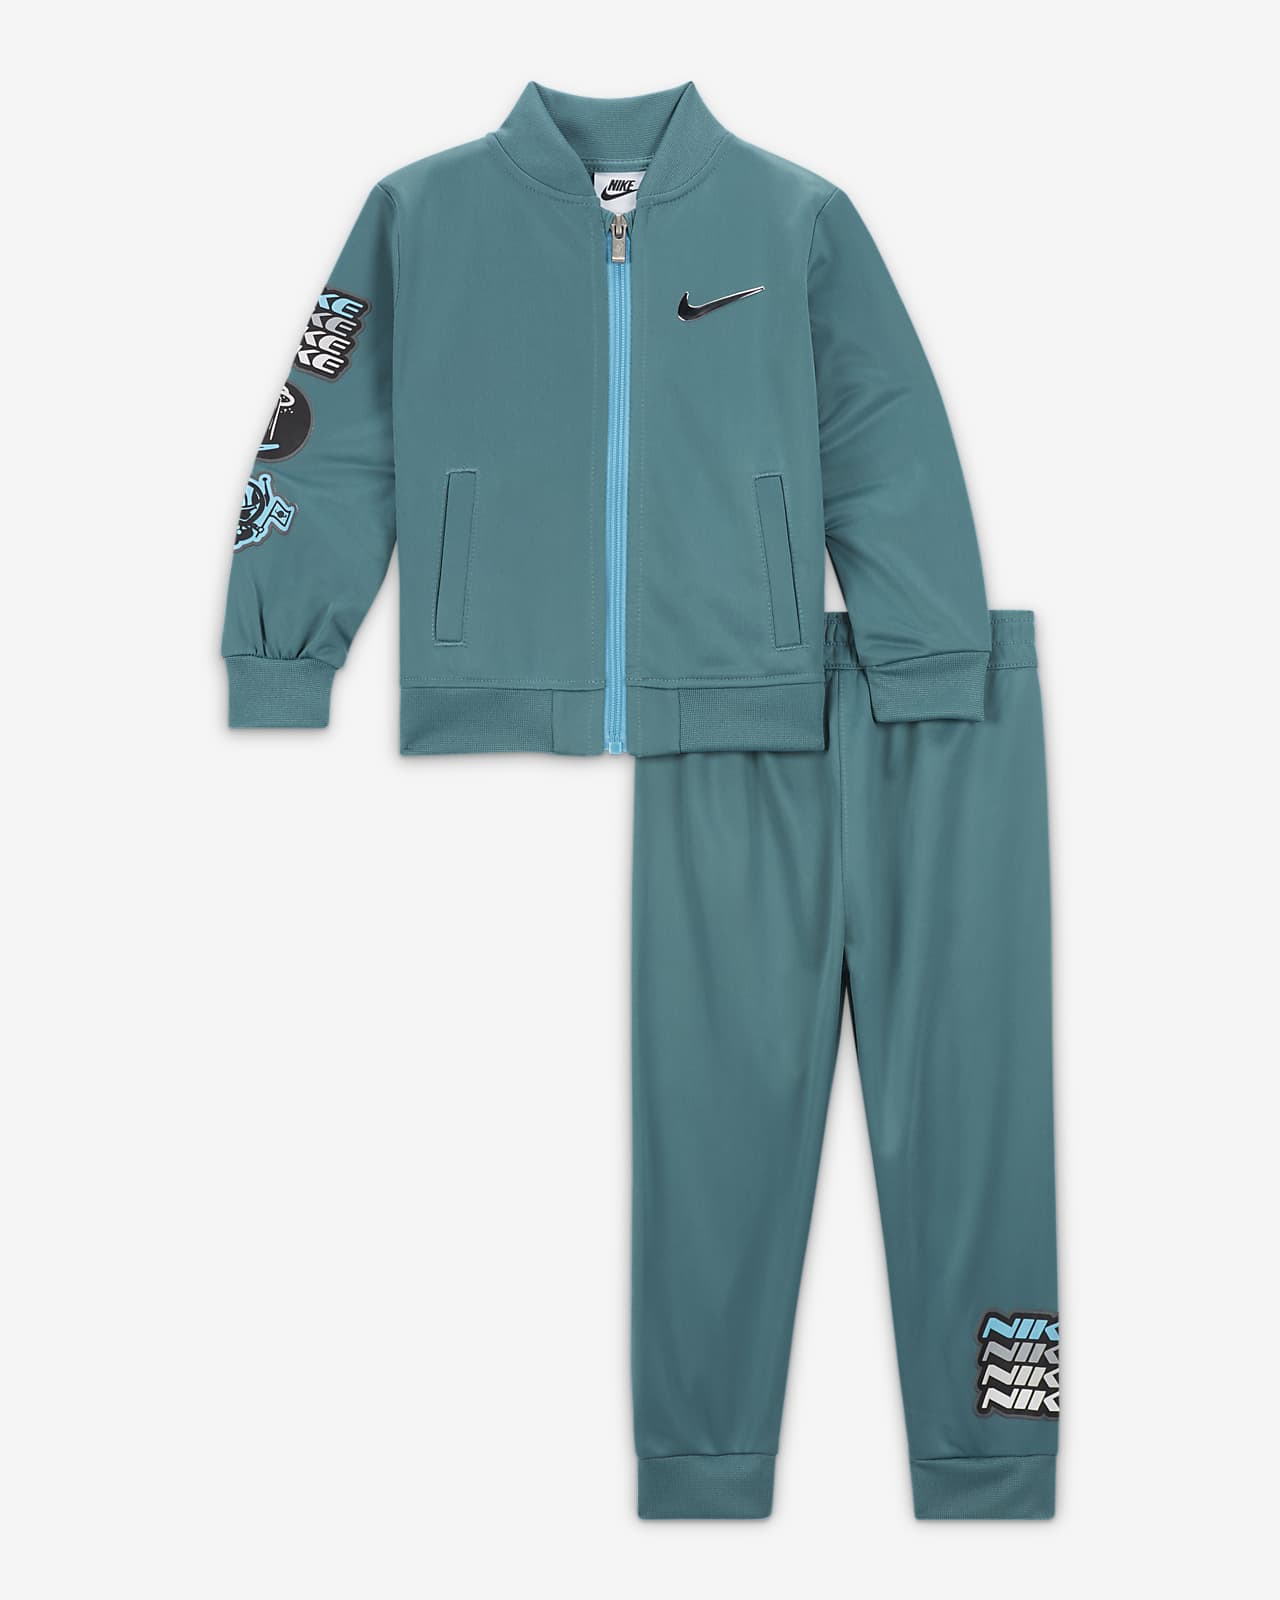  Nike Boy's Tricot Tracksuit Two-Piece Set (Little Kids)  Black/White 7 Little Kid: Clothing, Shoes & Jewelry